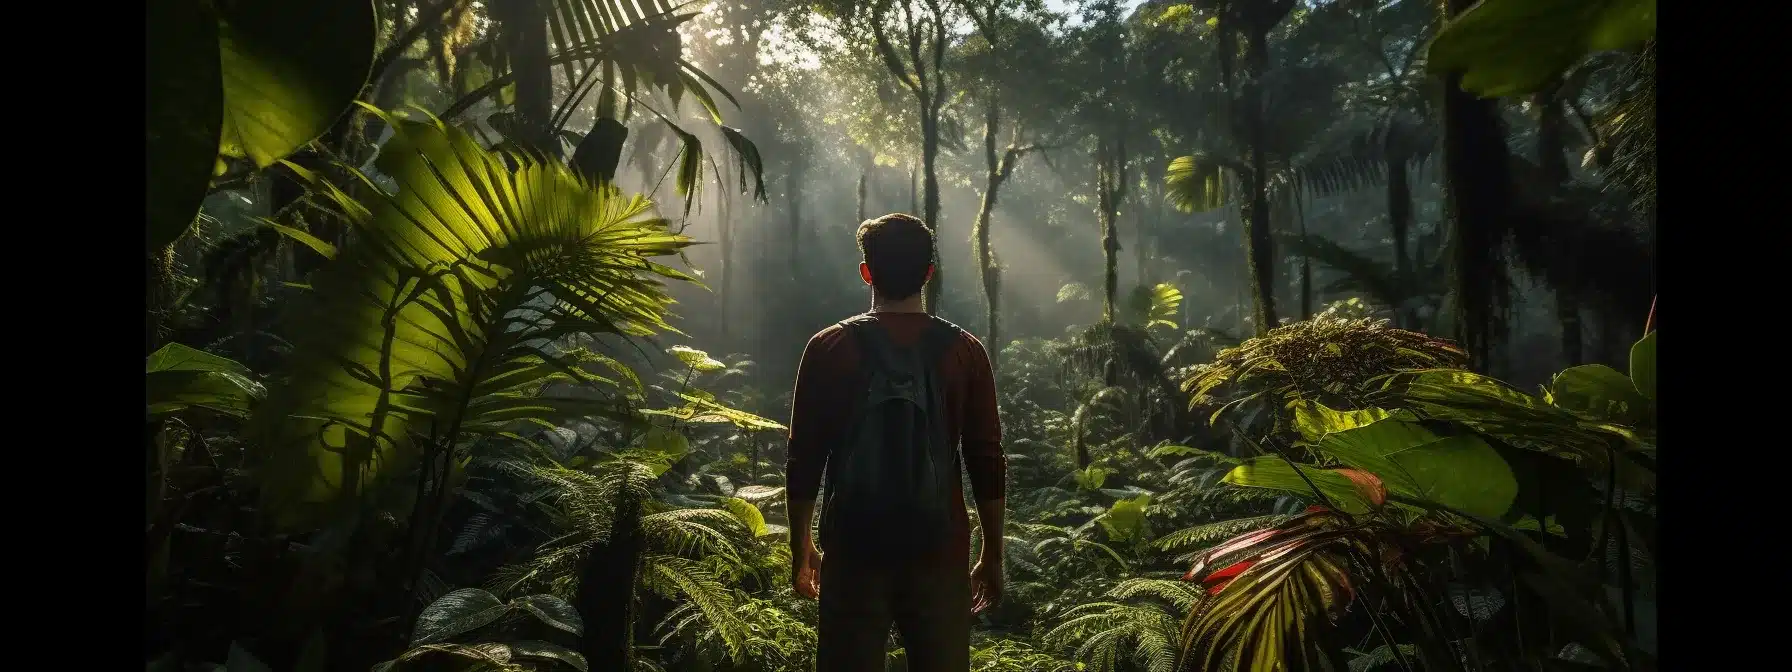 A Person Standing In The Amazon Rainforest, Surrounded By Lush Foliage And Listening To The Sounds Of Nature.